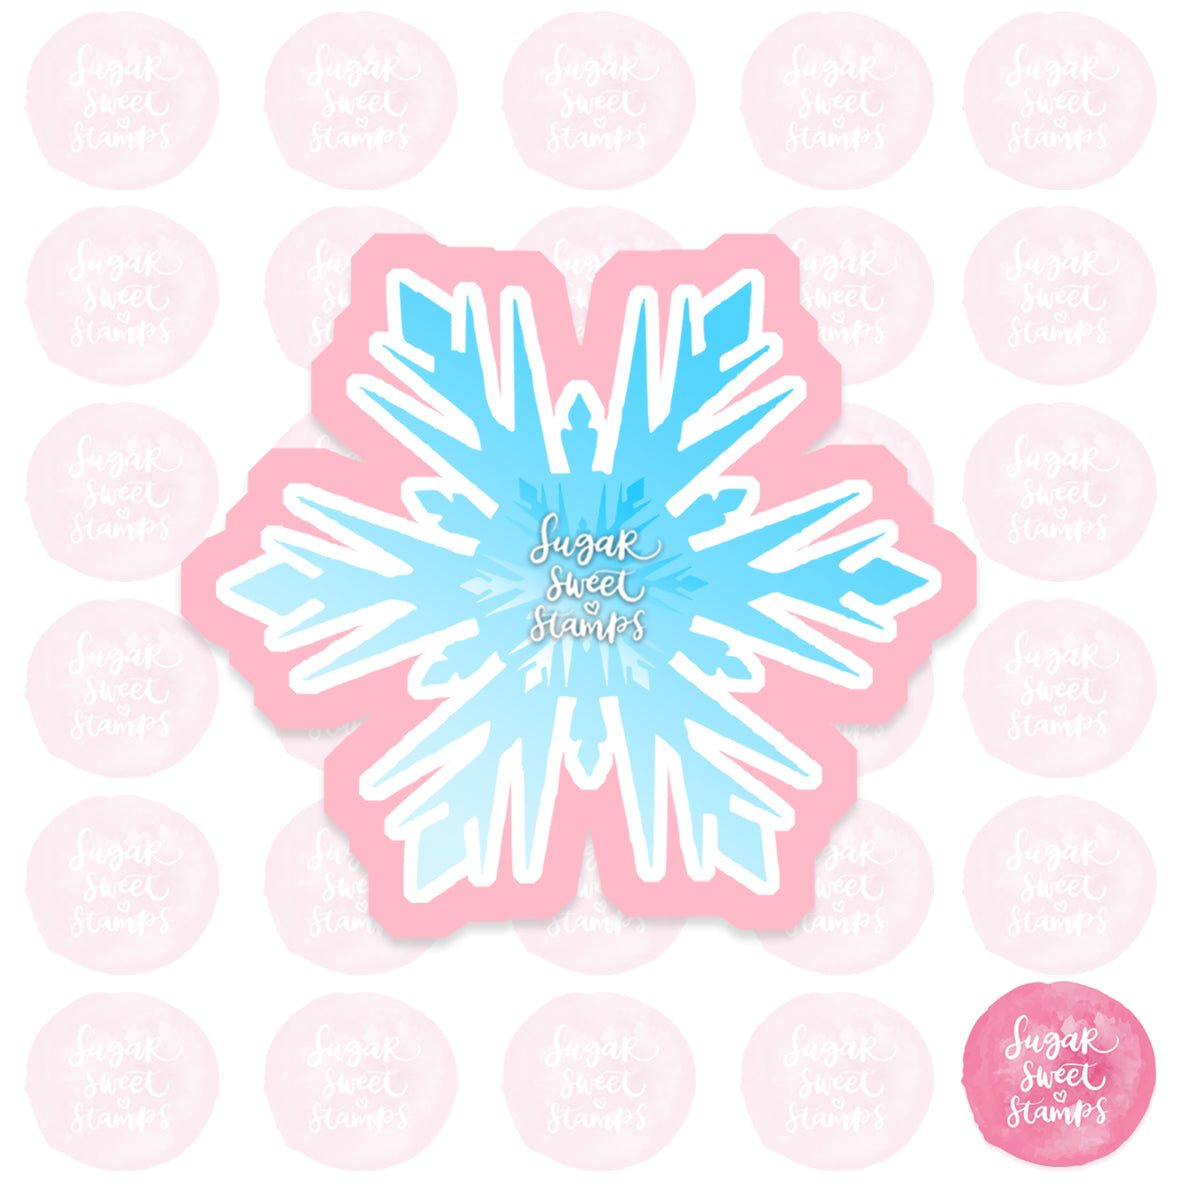 frozen snowflake let it go winter snow xmas christmas custom 3d printed cookie cutter